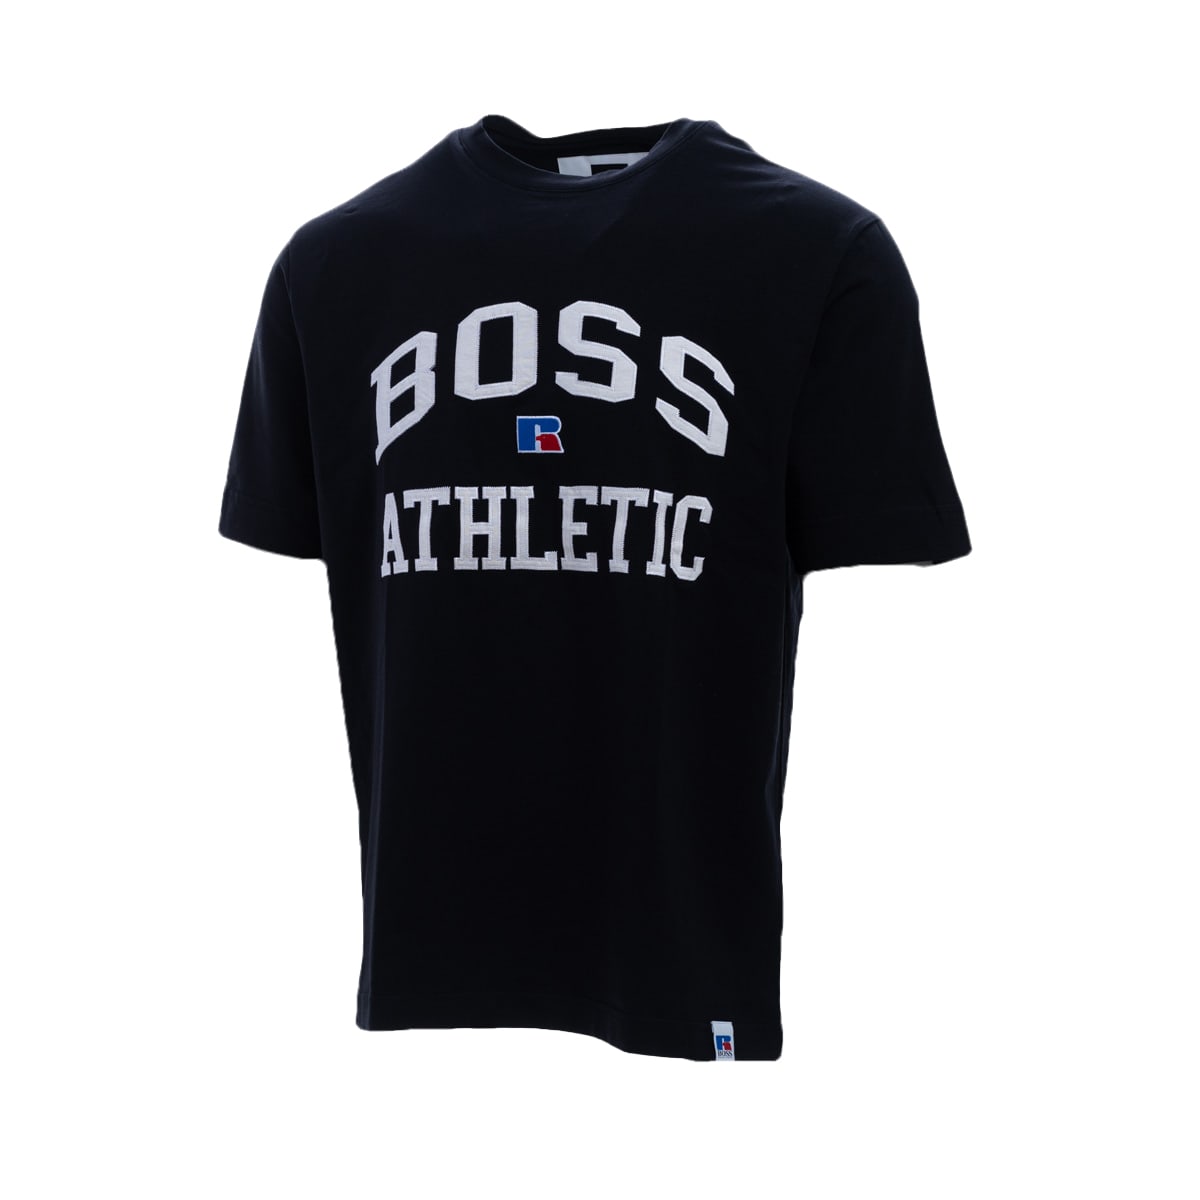 Russell Athletic Boss X Russell Atlhletic Cotton Blend T-shirt